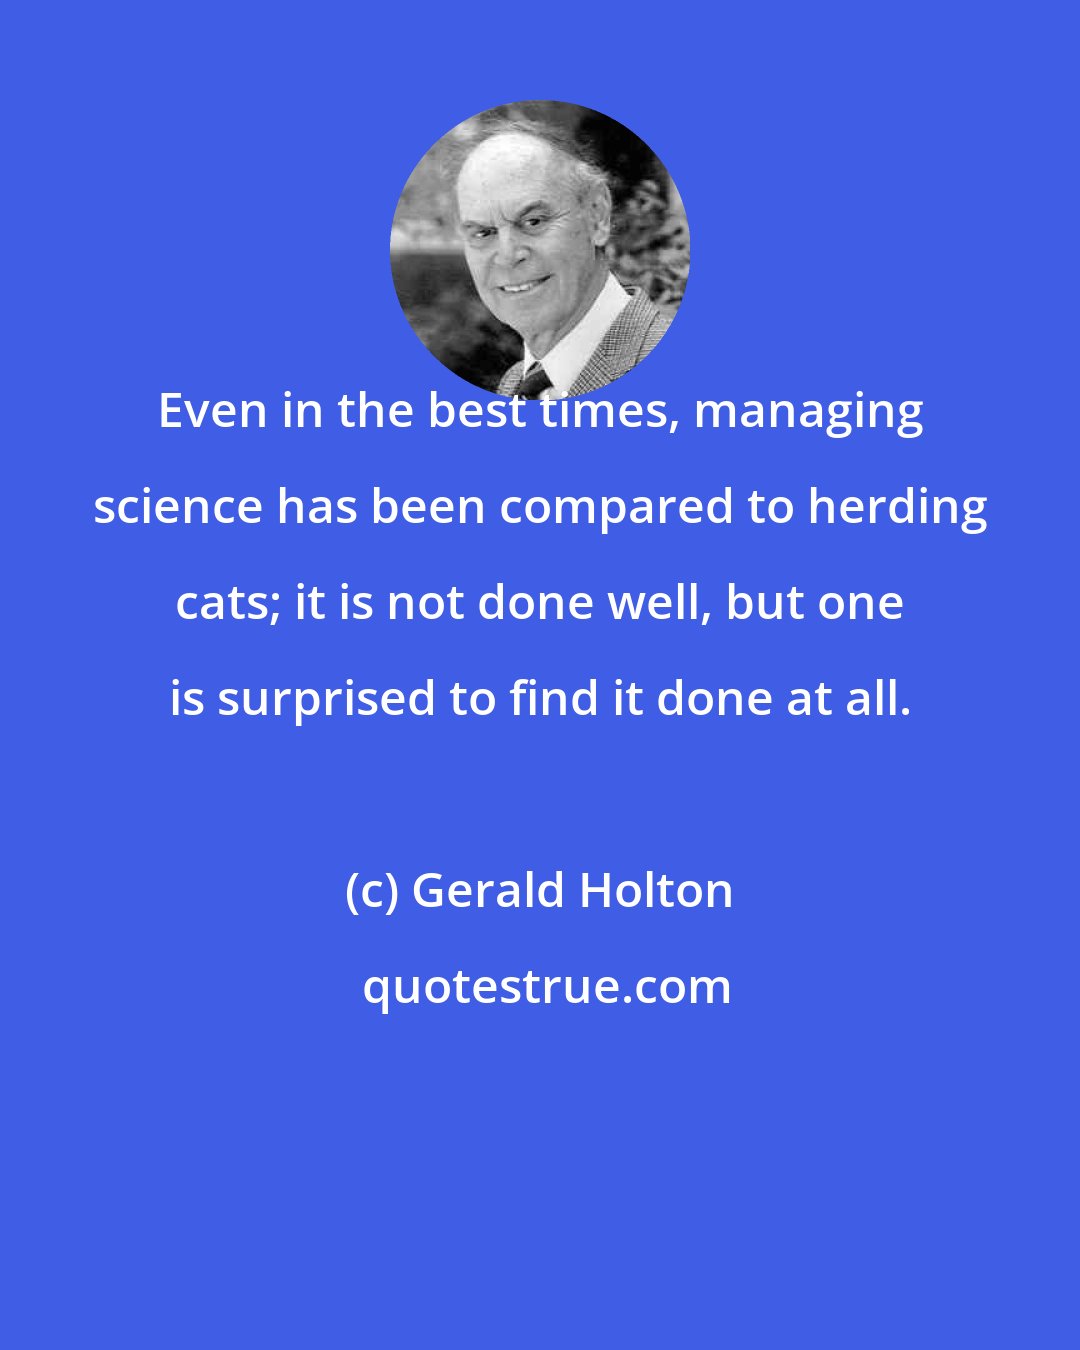 Gerald Holton: Even in the best times, managing science has been compared to herding cats; it is not done well, but one is surprised to find it done at all.